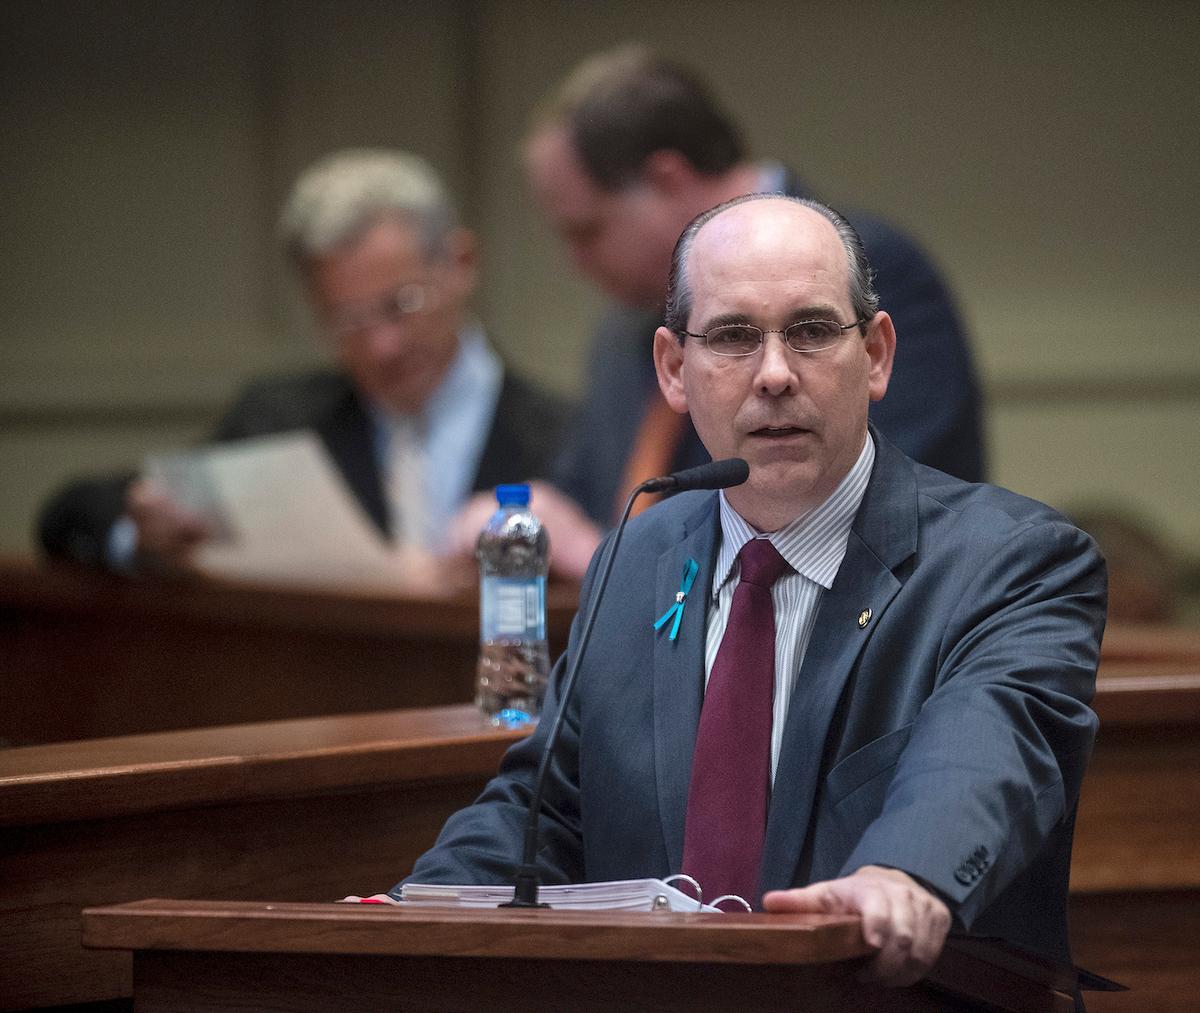 Sen. Clyde Chambliss speaks as debate on HB314 is held in the senate chamber in the Alabama Statehouse in Montgomery, Ala., on Tuesday May 14, 2019. (Mickey Welsh/Montgomery Advertiser via AP)